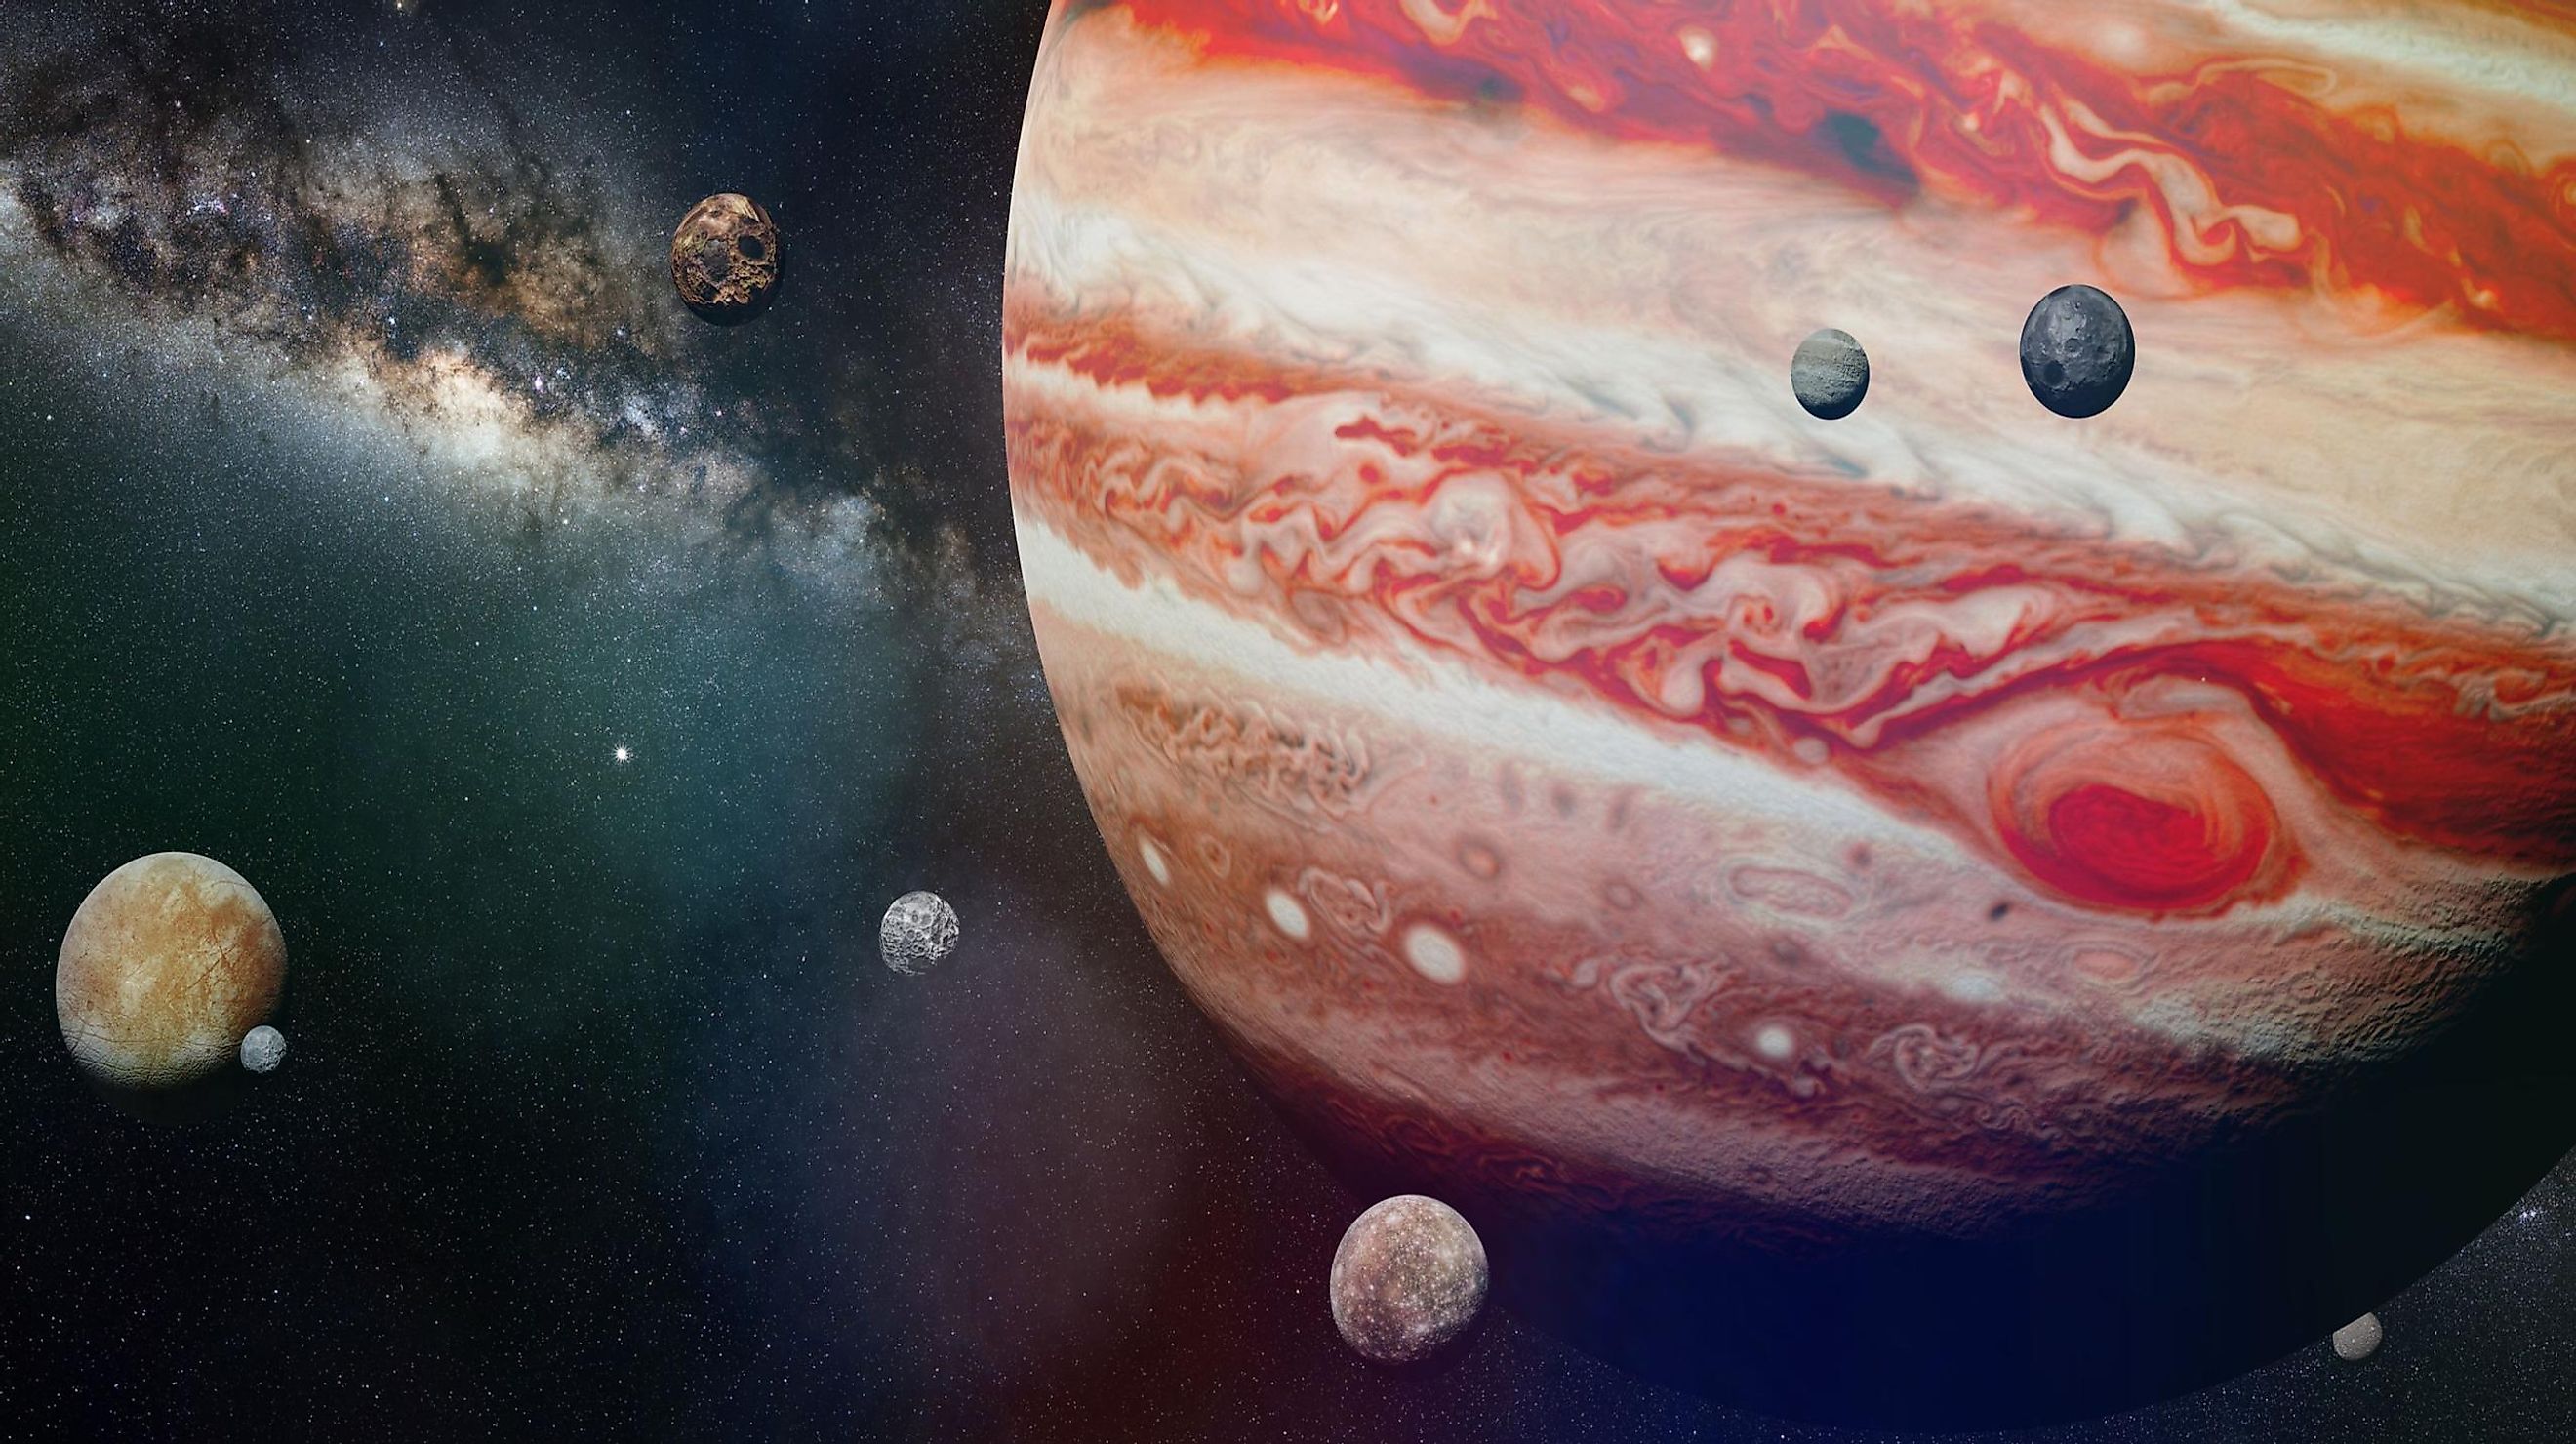 An Illustration of Jupiter and Some of its Moon Orbiting it